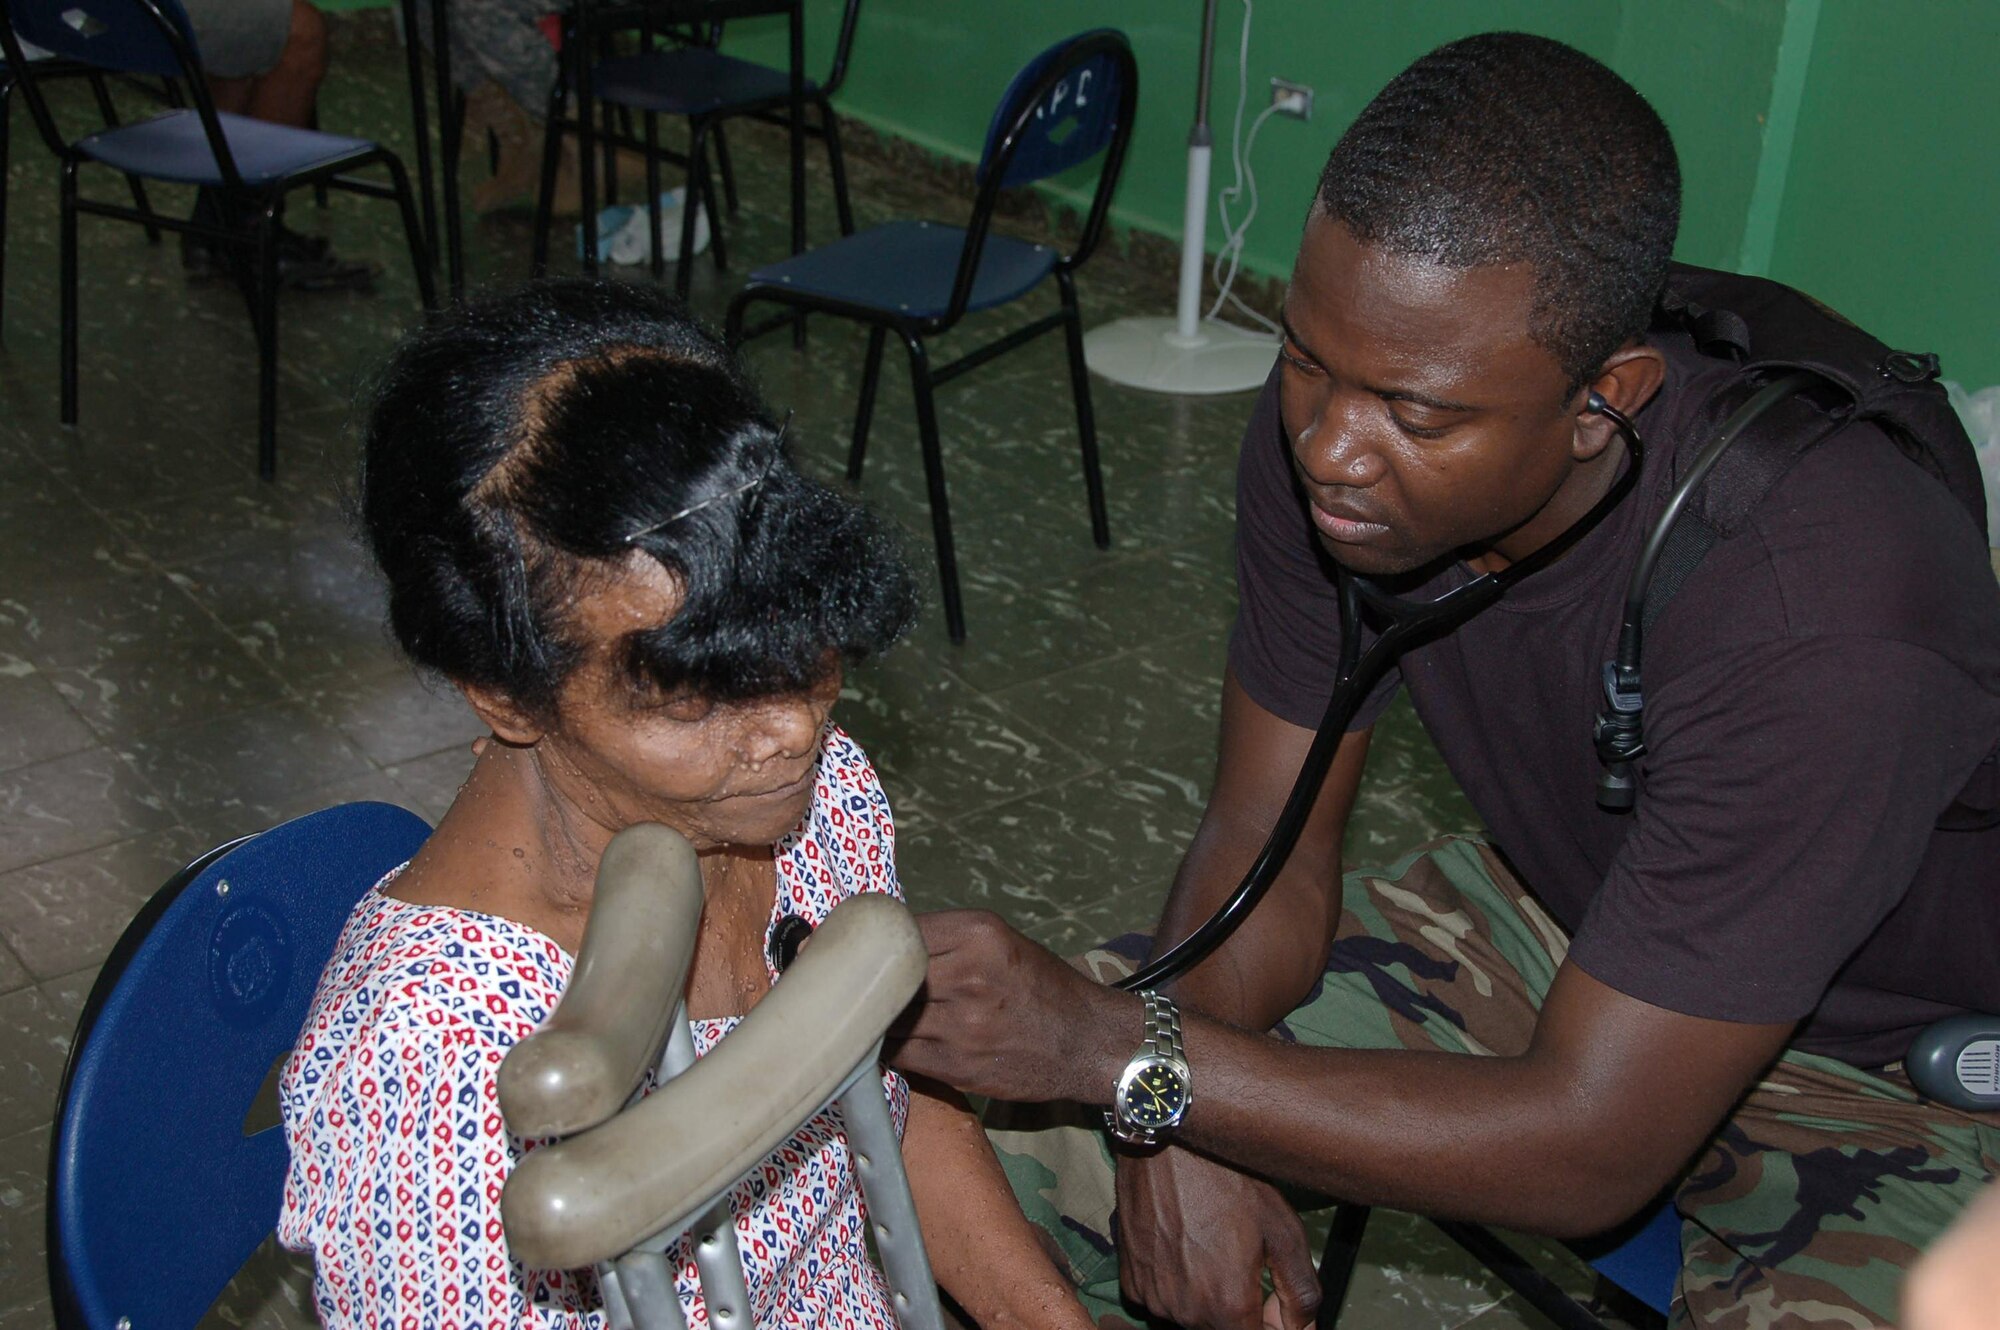 Capt. Keiron T. Kennedy gives a physical exam to a patient with neurofibromatosis, a genetic disorder causing multiple tumors, at a temporary clinic in Hostos, Dom. Rep., April 21, during a medical readiness exercise. The medics treated 1,800 patients during the first two days of the U.S. Southern Command sponsored Beyond the Horizon 2009 - Caribbean. Captain Kennedy is a flight surgeon from the 42nd Medical Group at Maxwell Air Force Base, Ala., (U.S. Air Force photo/Capt. Ben Sakrisson) 